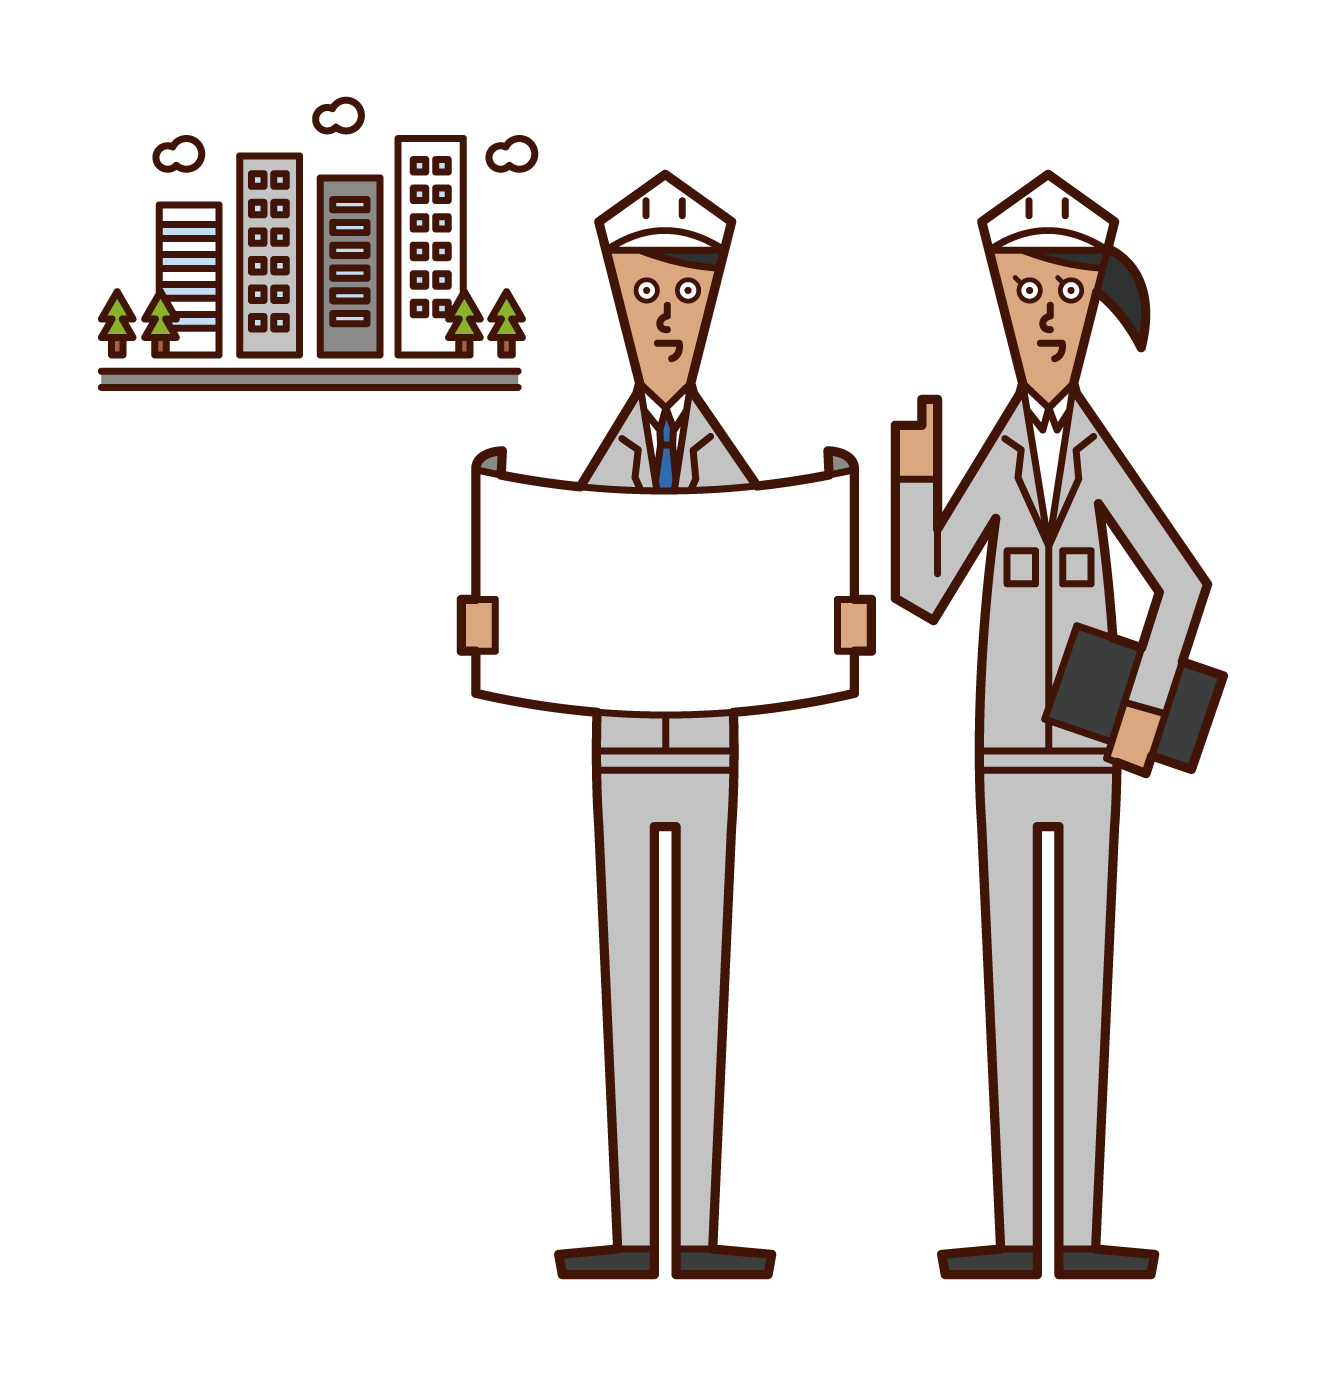 Illustration of a person developing an urban area